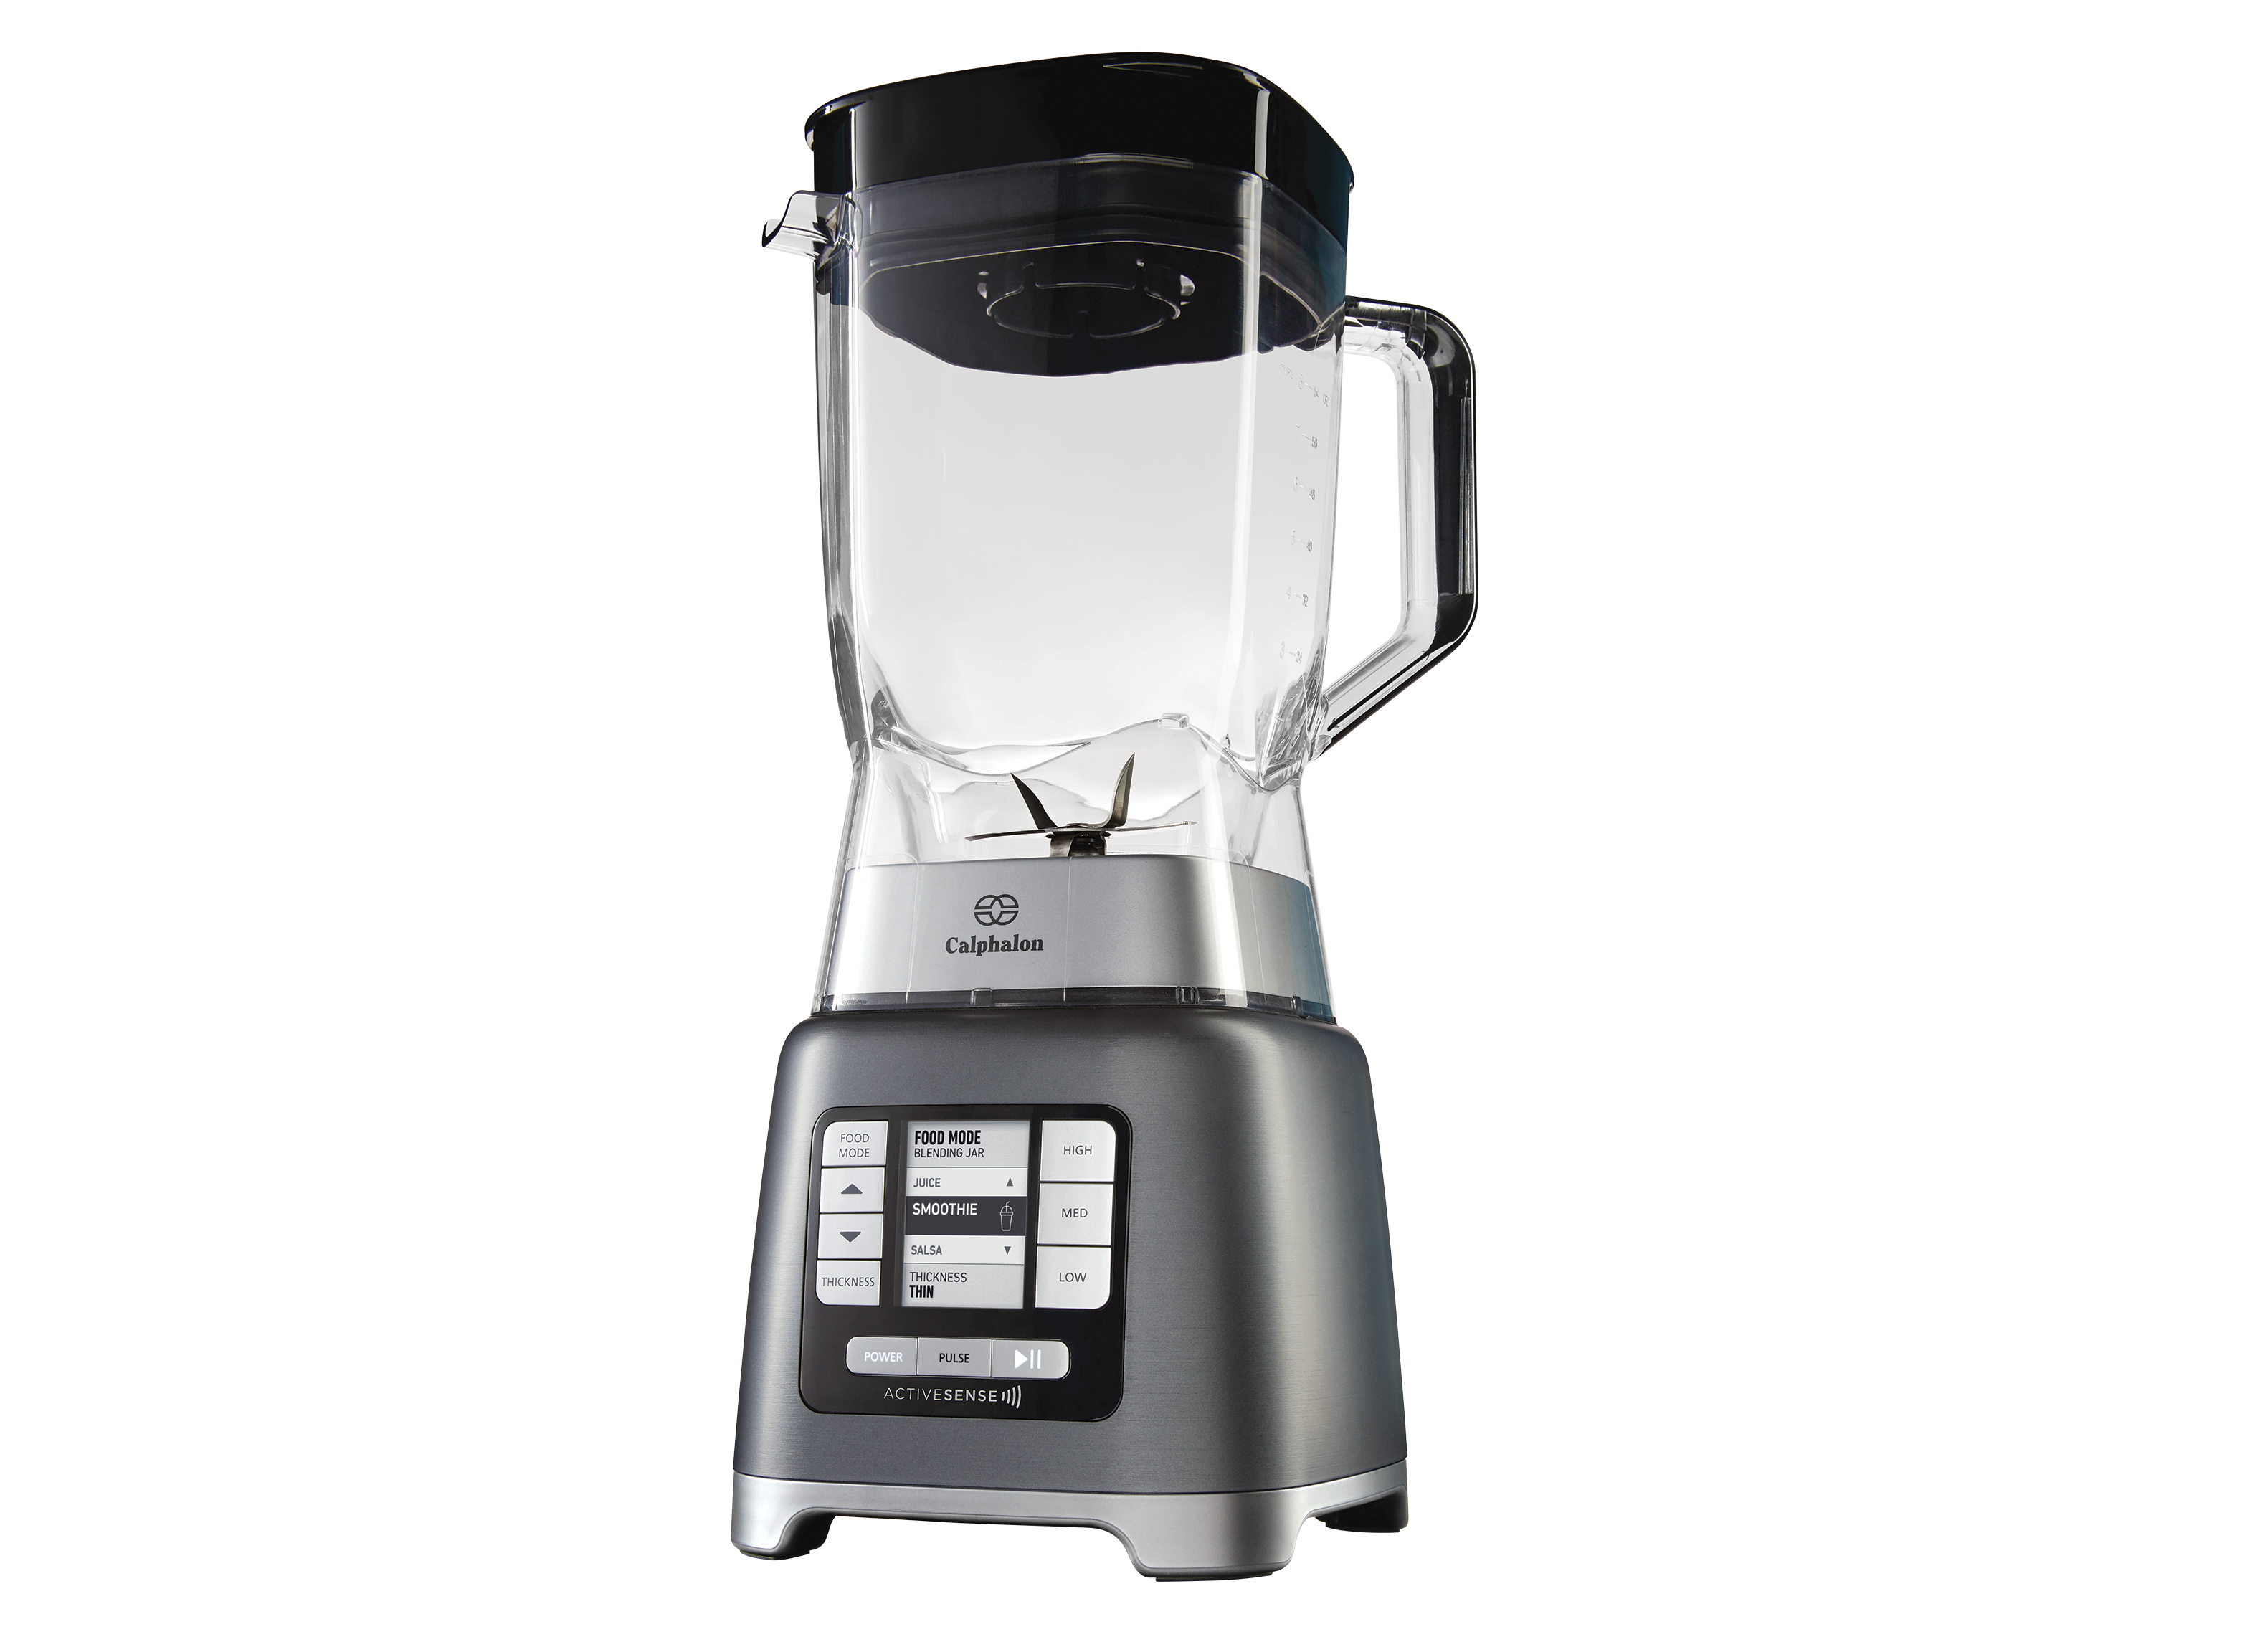 https://crdms.images.consumerreports.org/prod/products/cr/models/402426-full-sized-blenders-calphalon-2099742-activesense-10015923.png